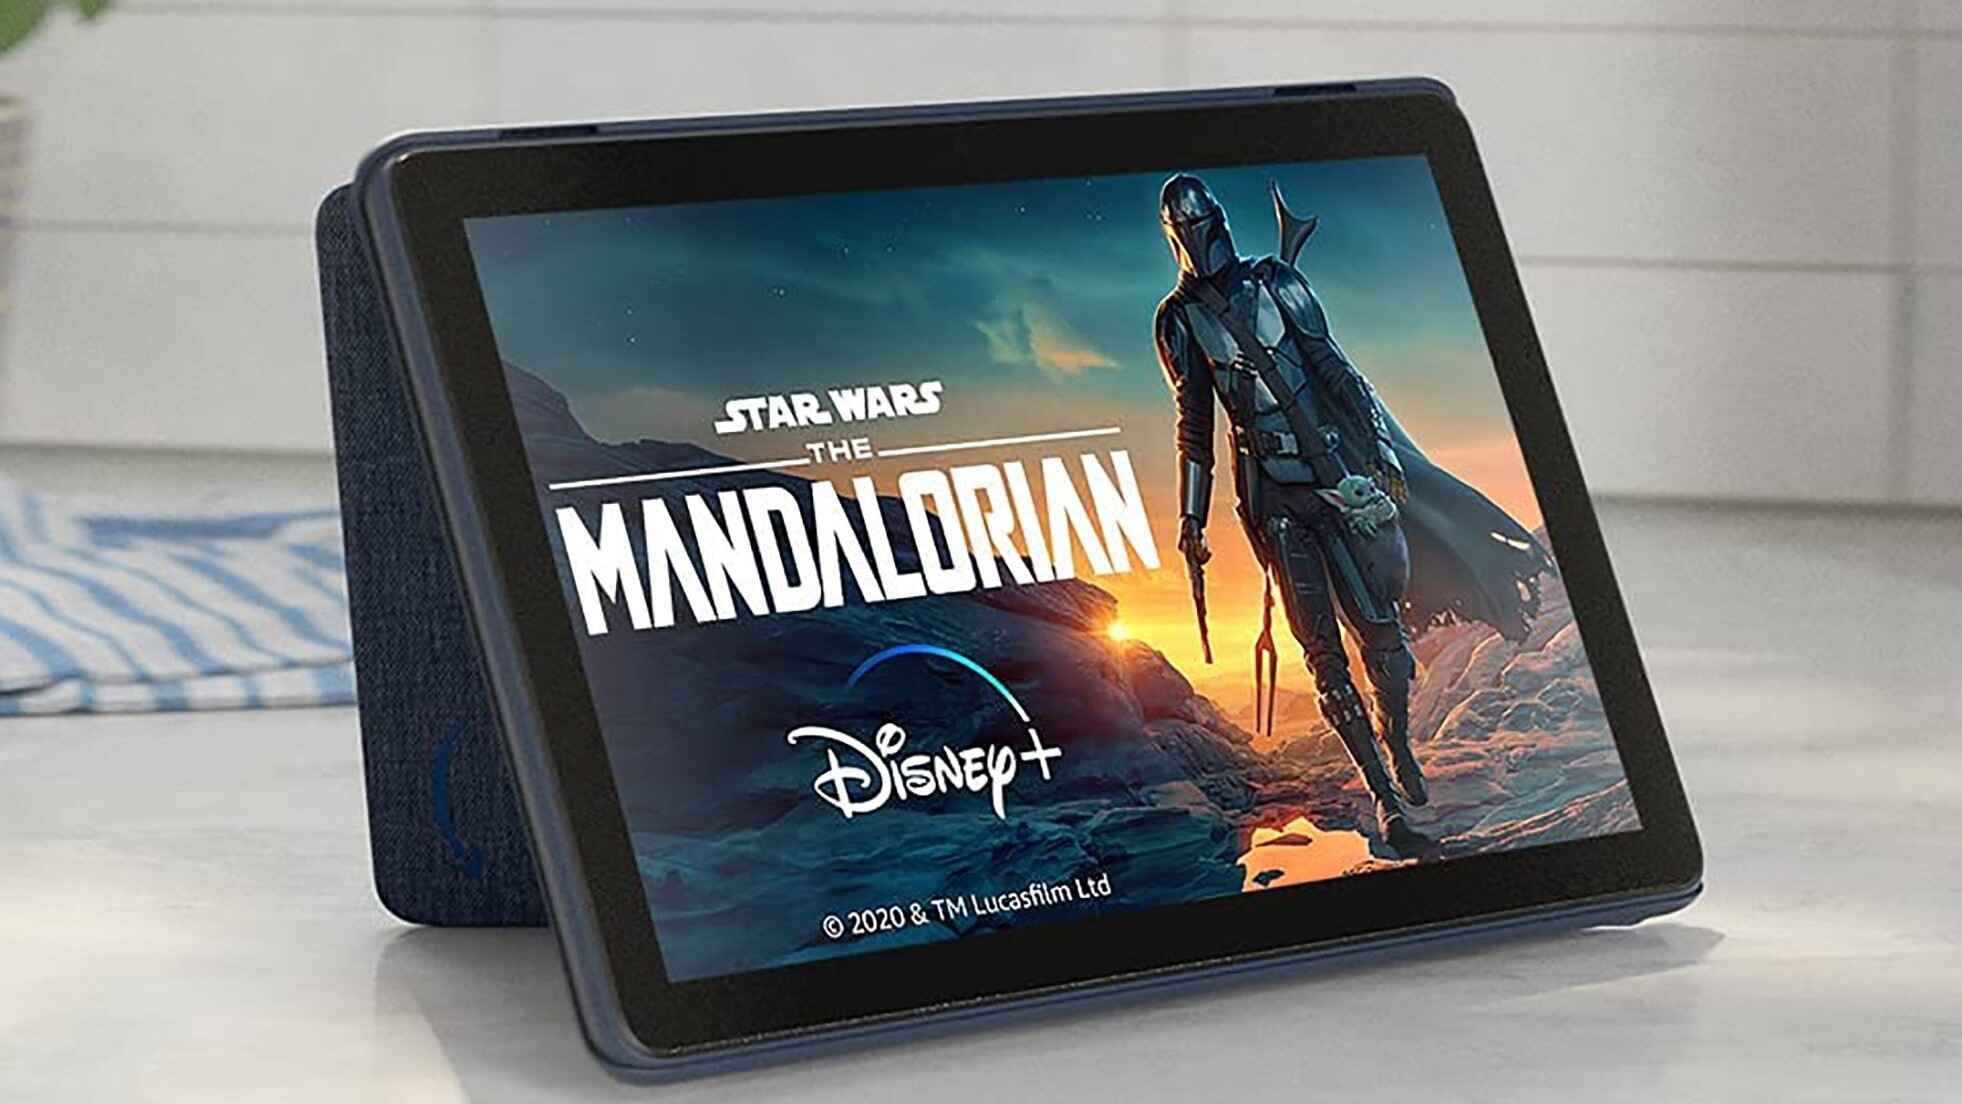 How To Download Games On Amazon Fire Tablet